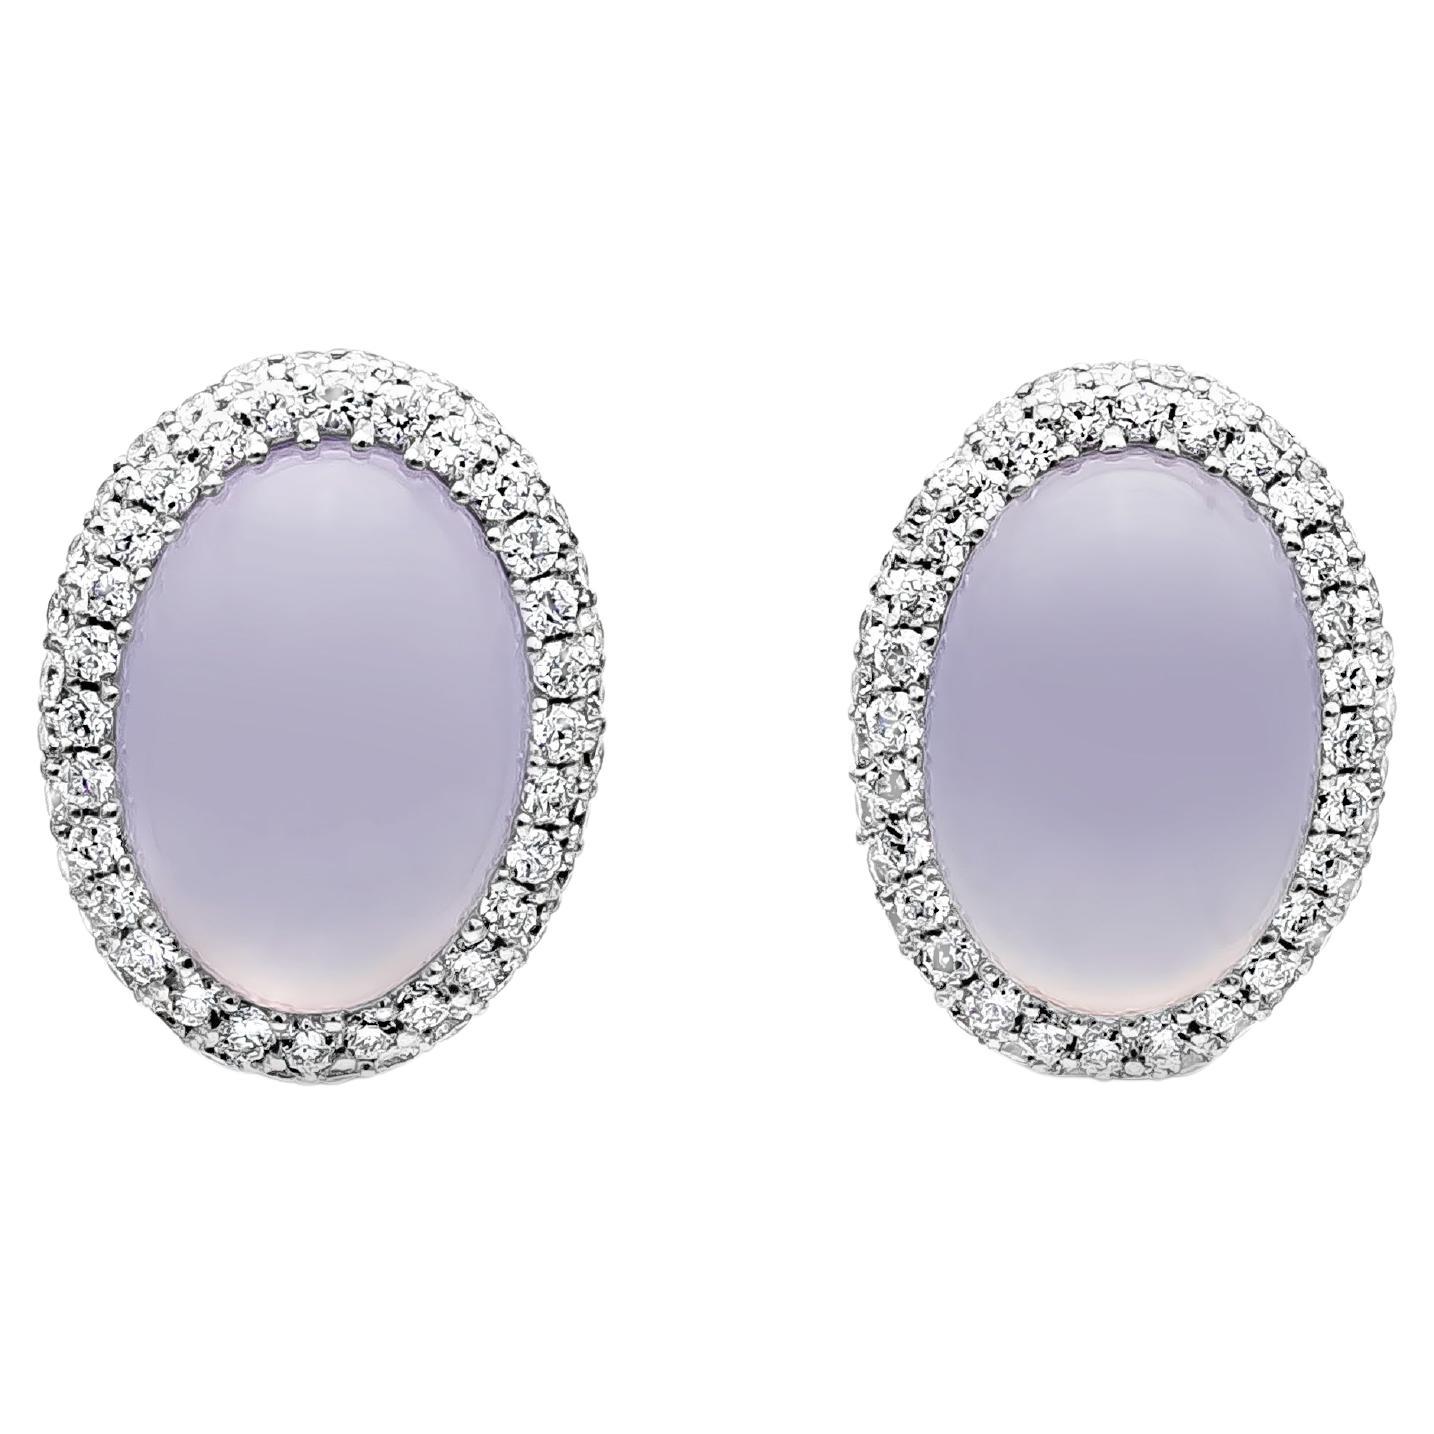 5.20 Carat Oval Cut Lavender Chalcedony Stud Earrings in White Gold For Sale